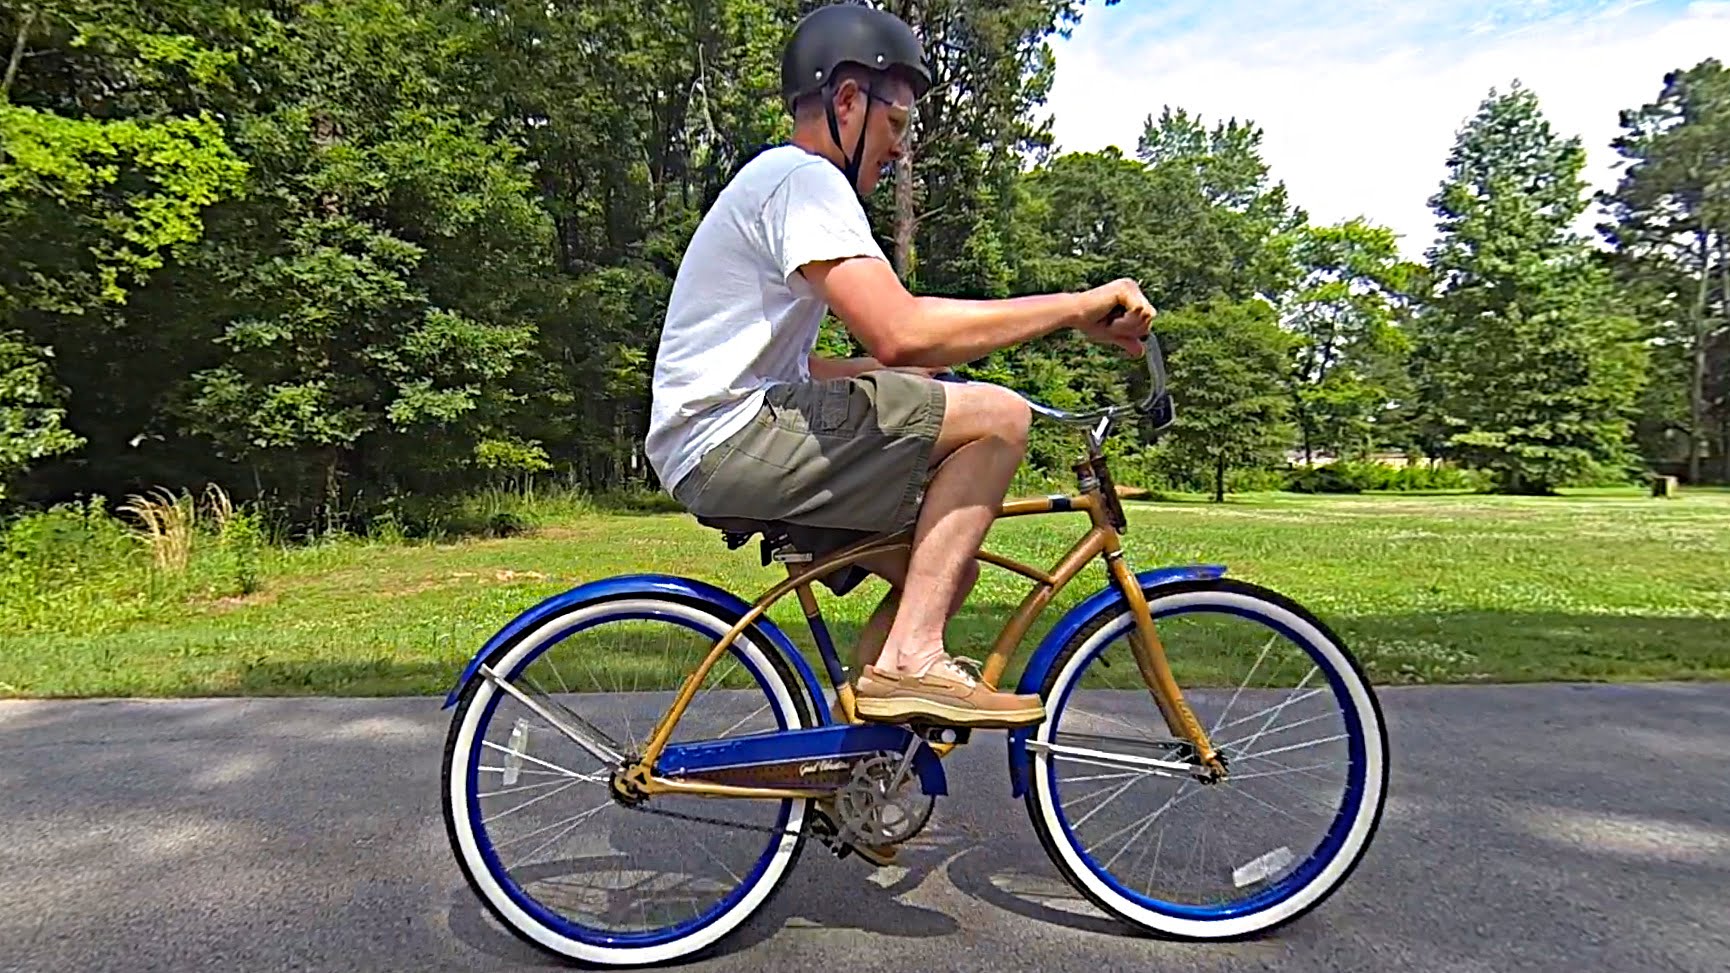 The Backwards Brain Bicycle is designed to be completely impossible to ride.